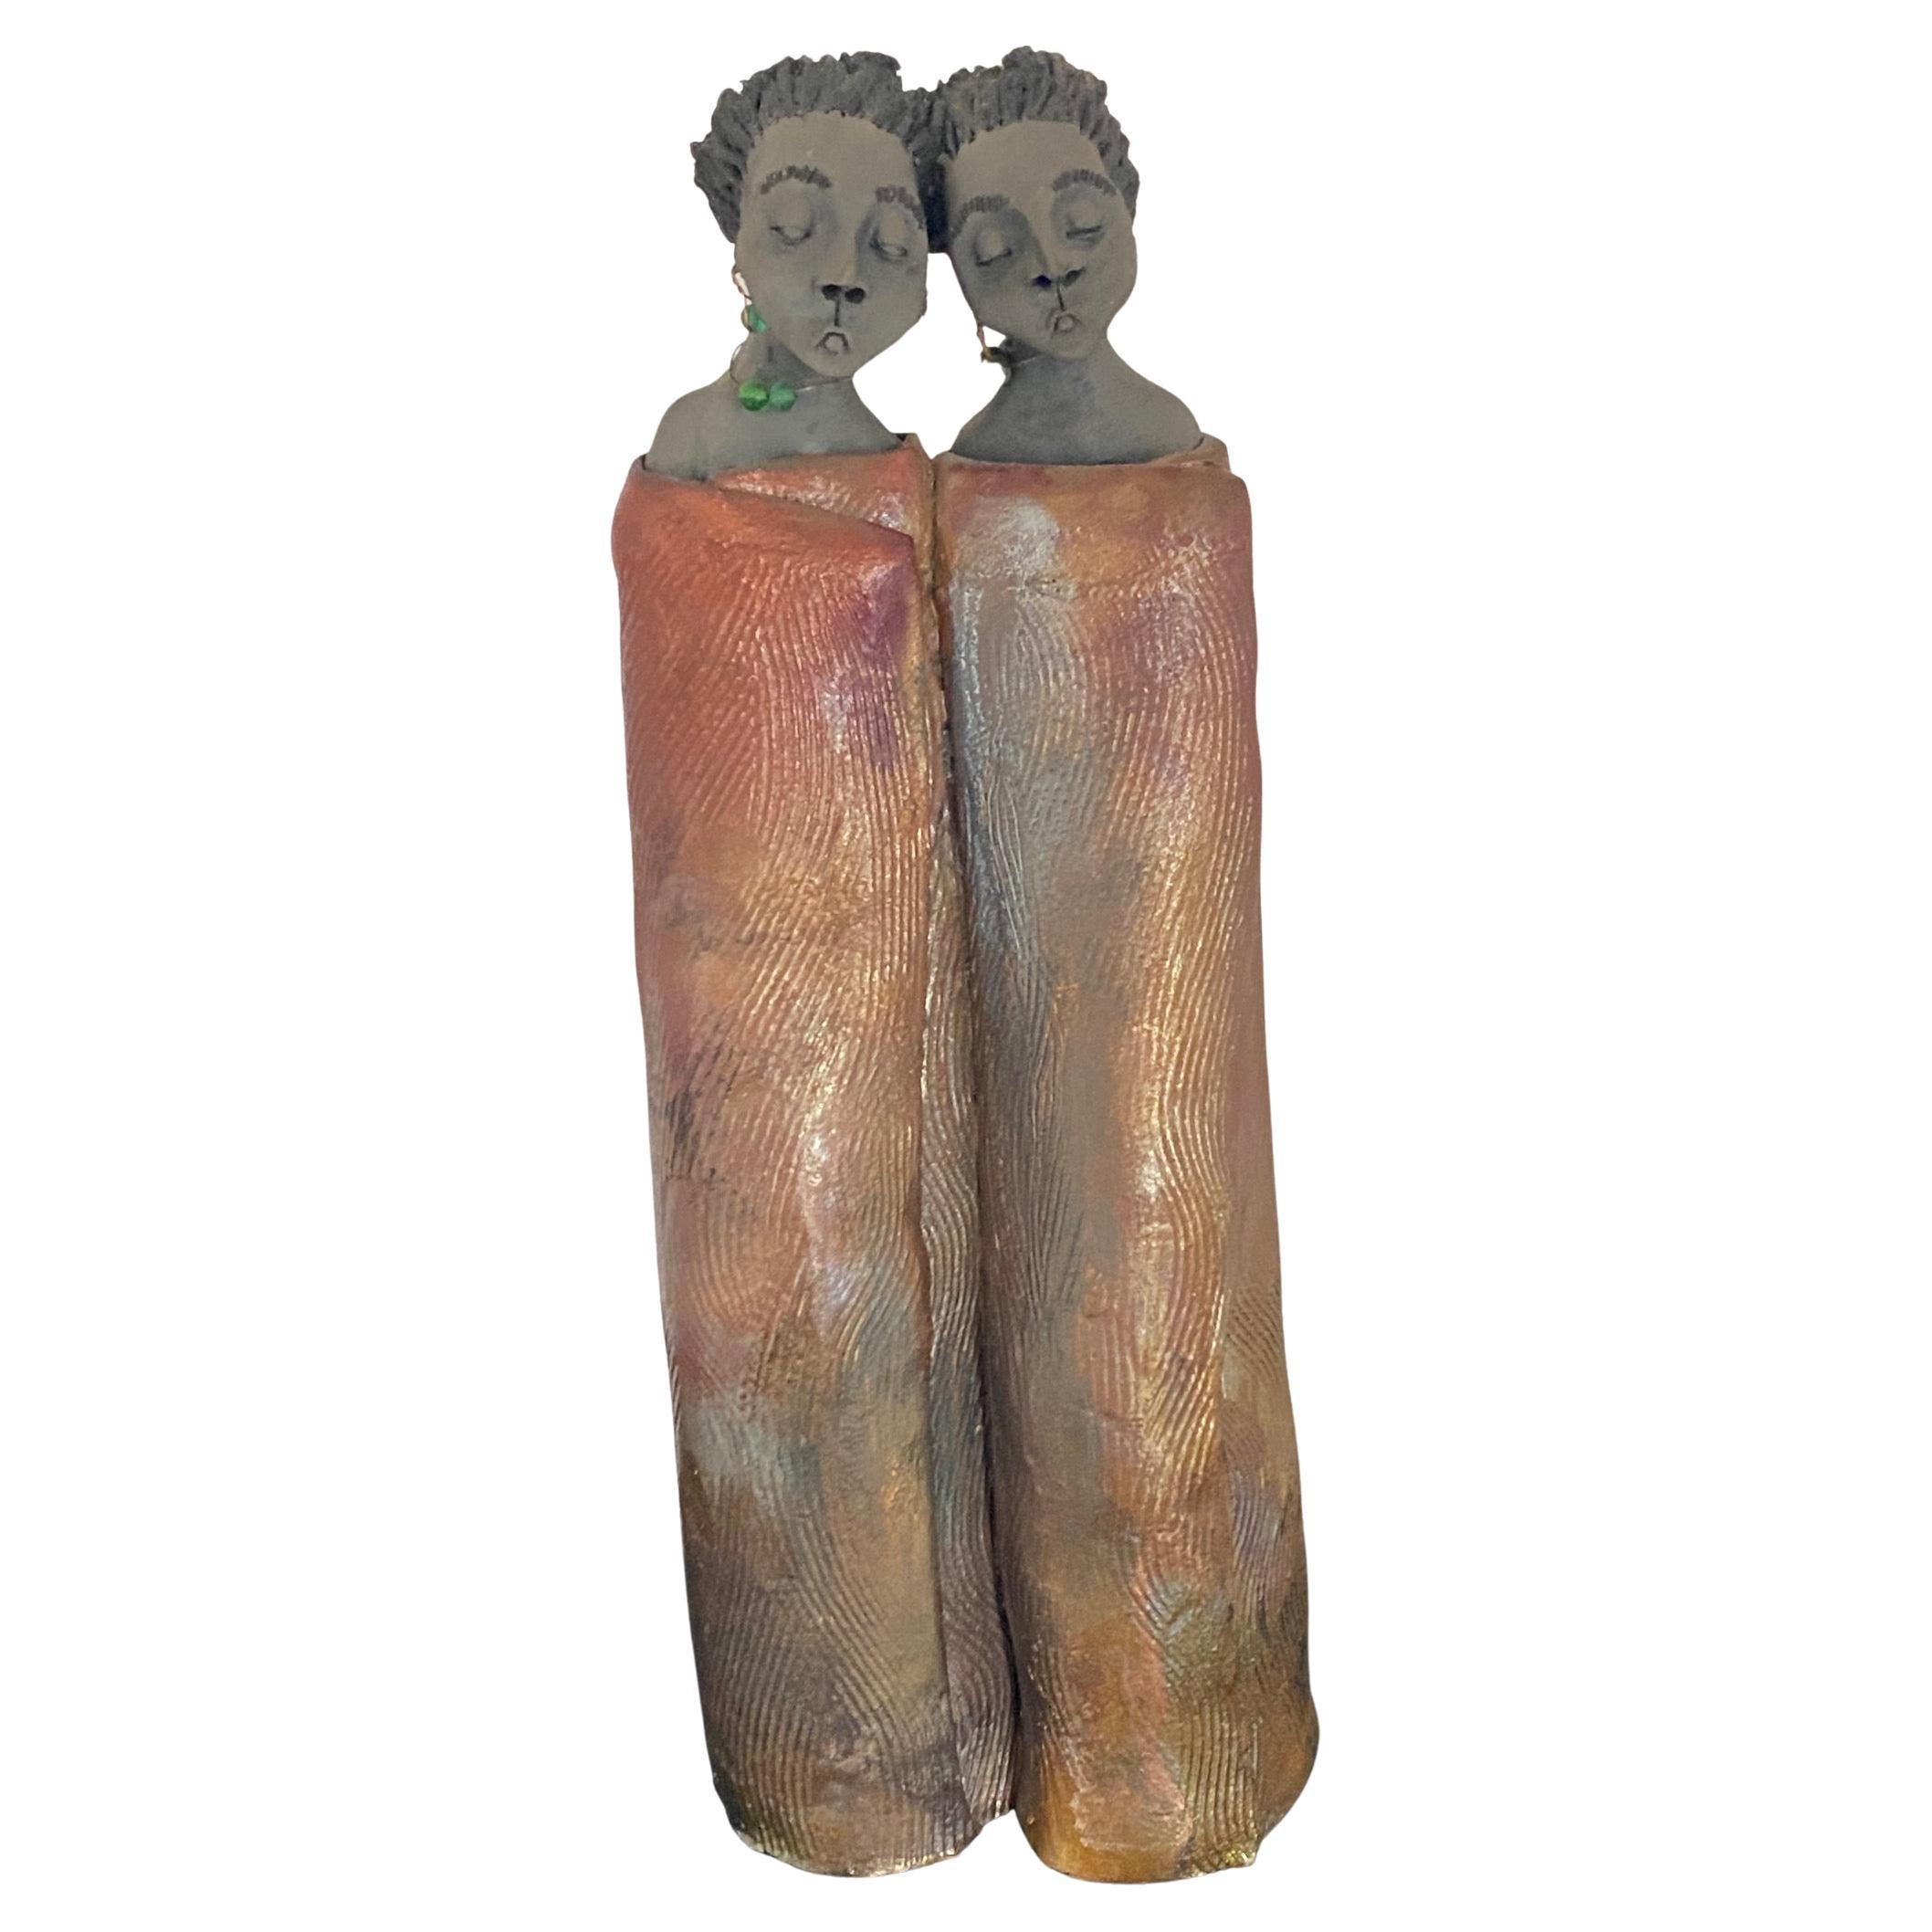 "Sisters" Two Women Ceramic Sculpture For Sale